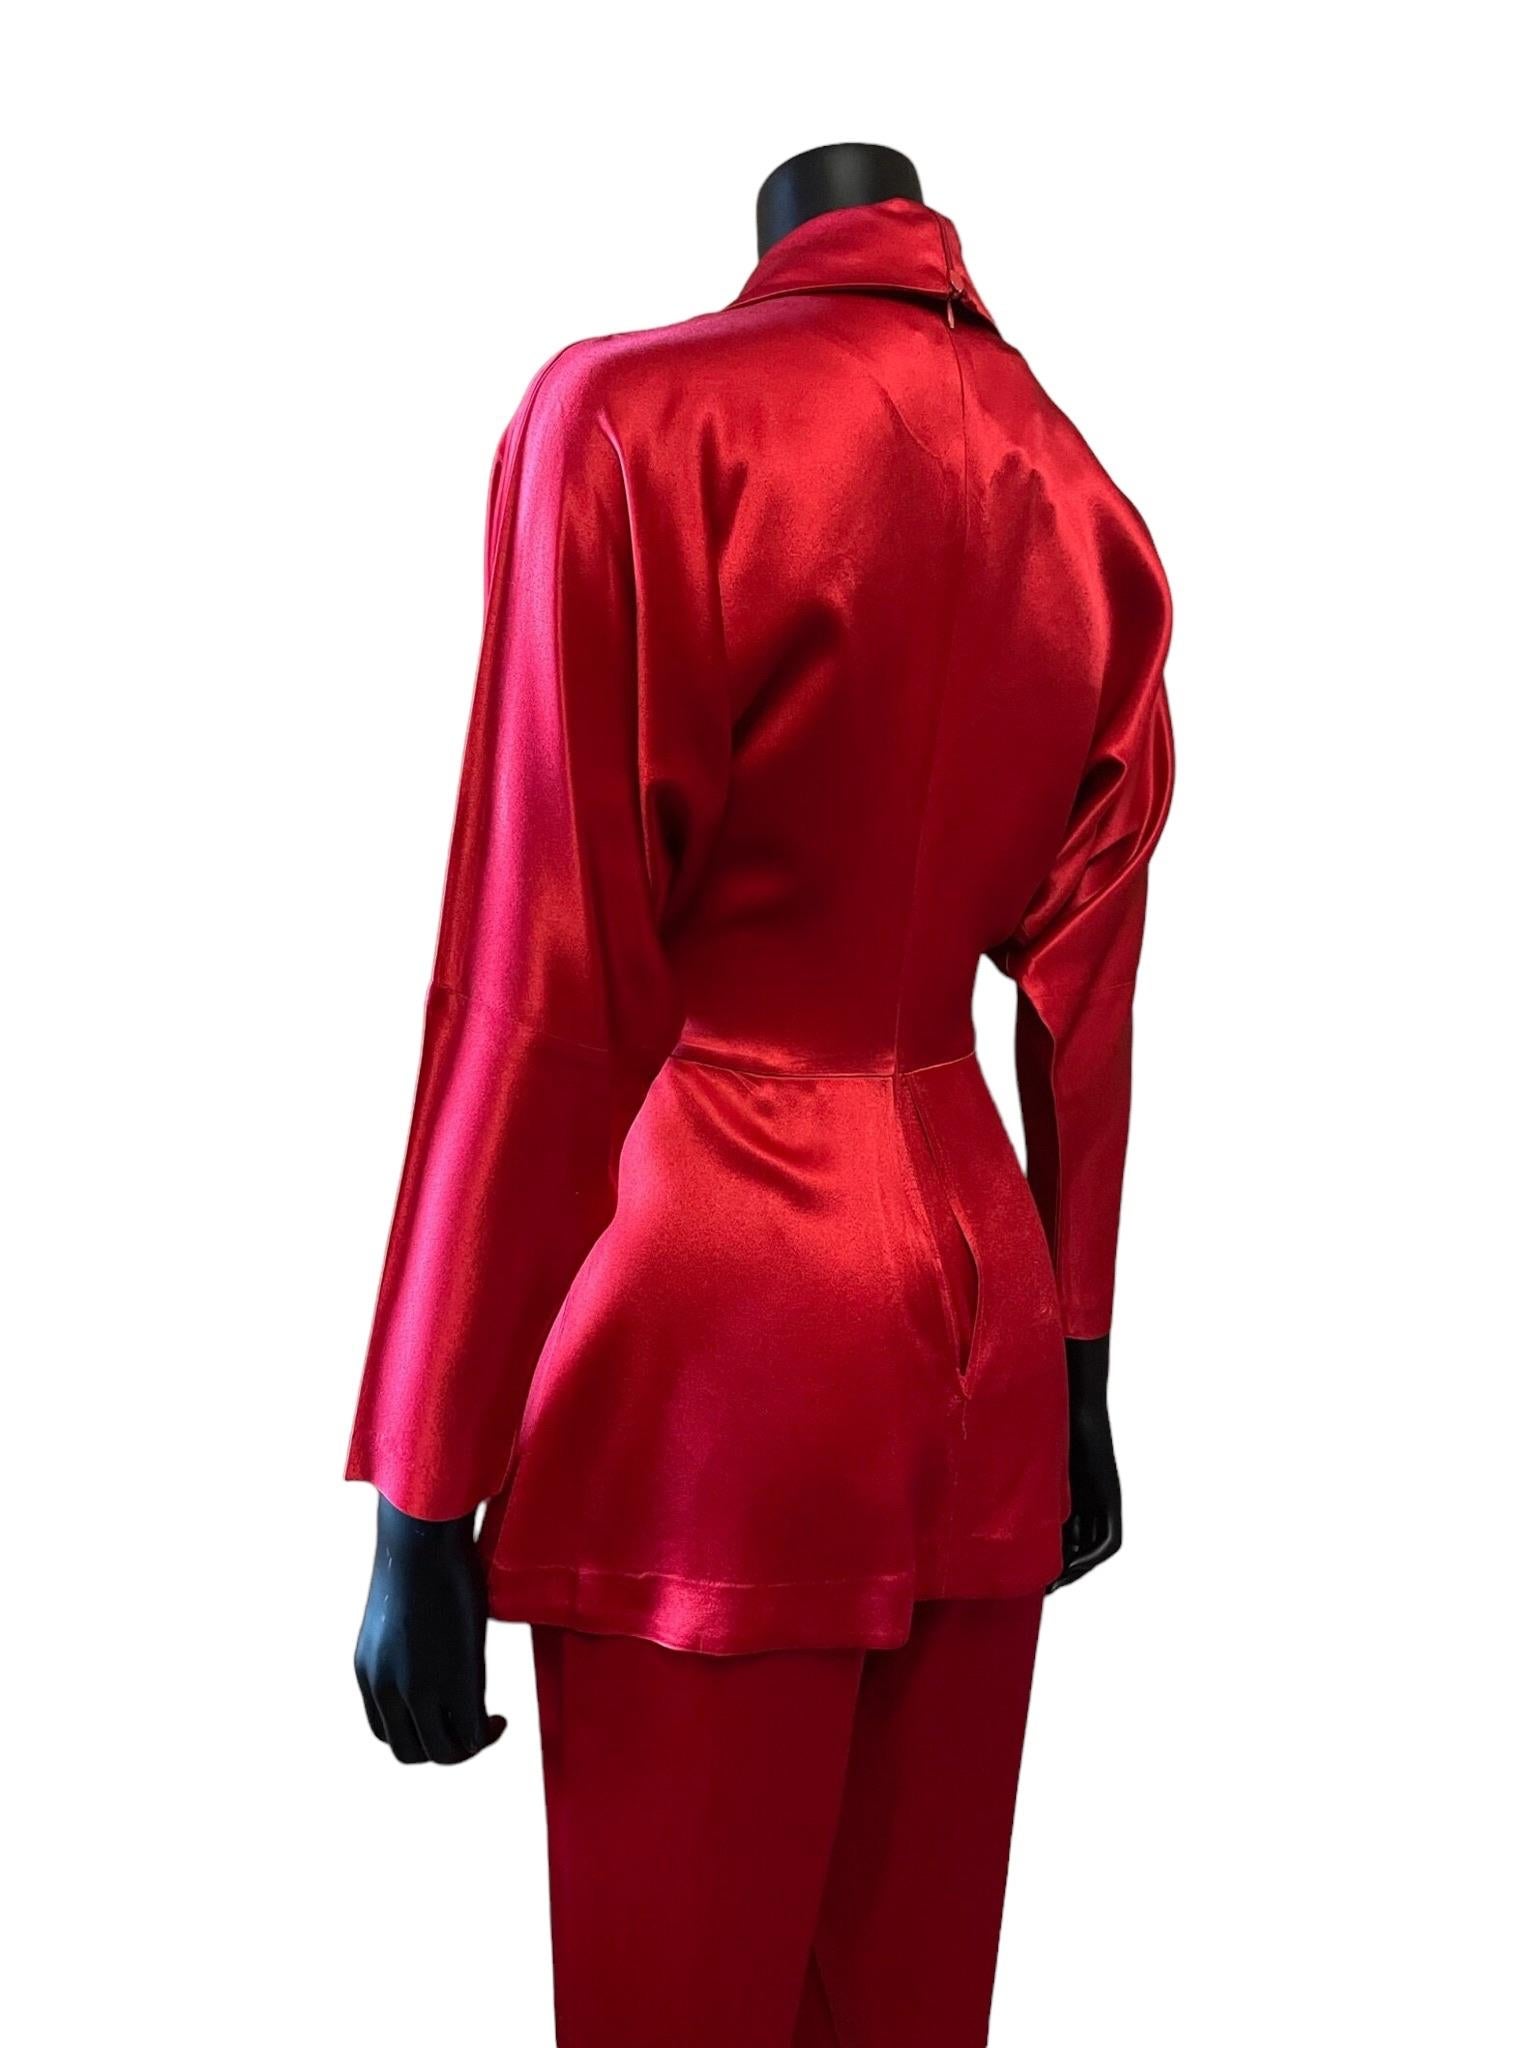 Norma Kamali Lipstick Red Jumpsuit, Circa 1980s For Sale 5